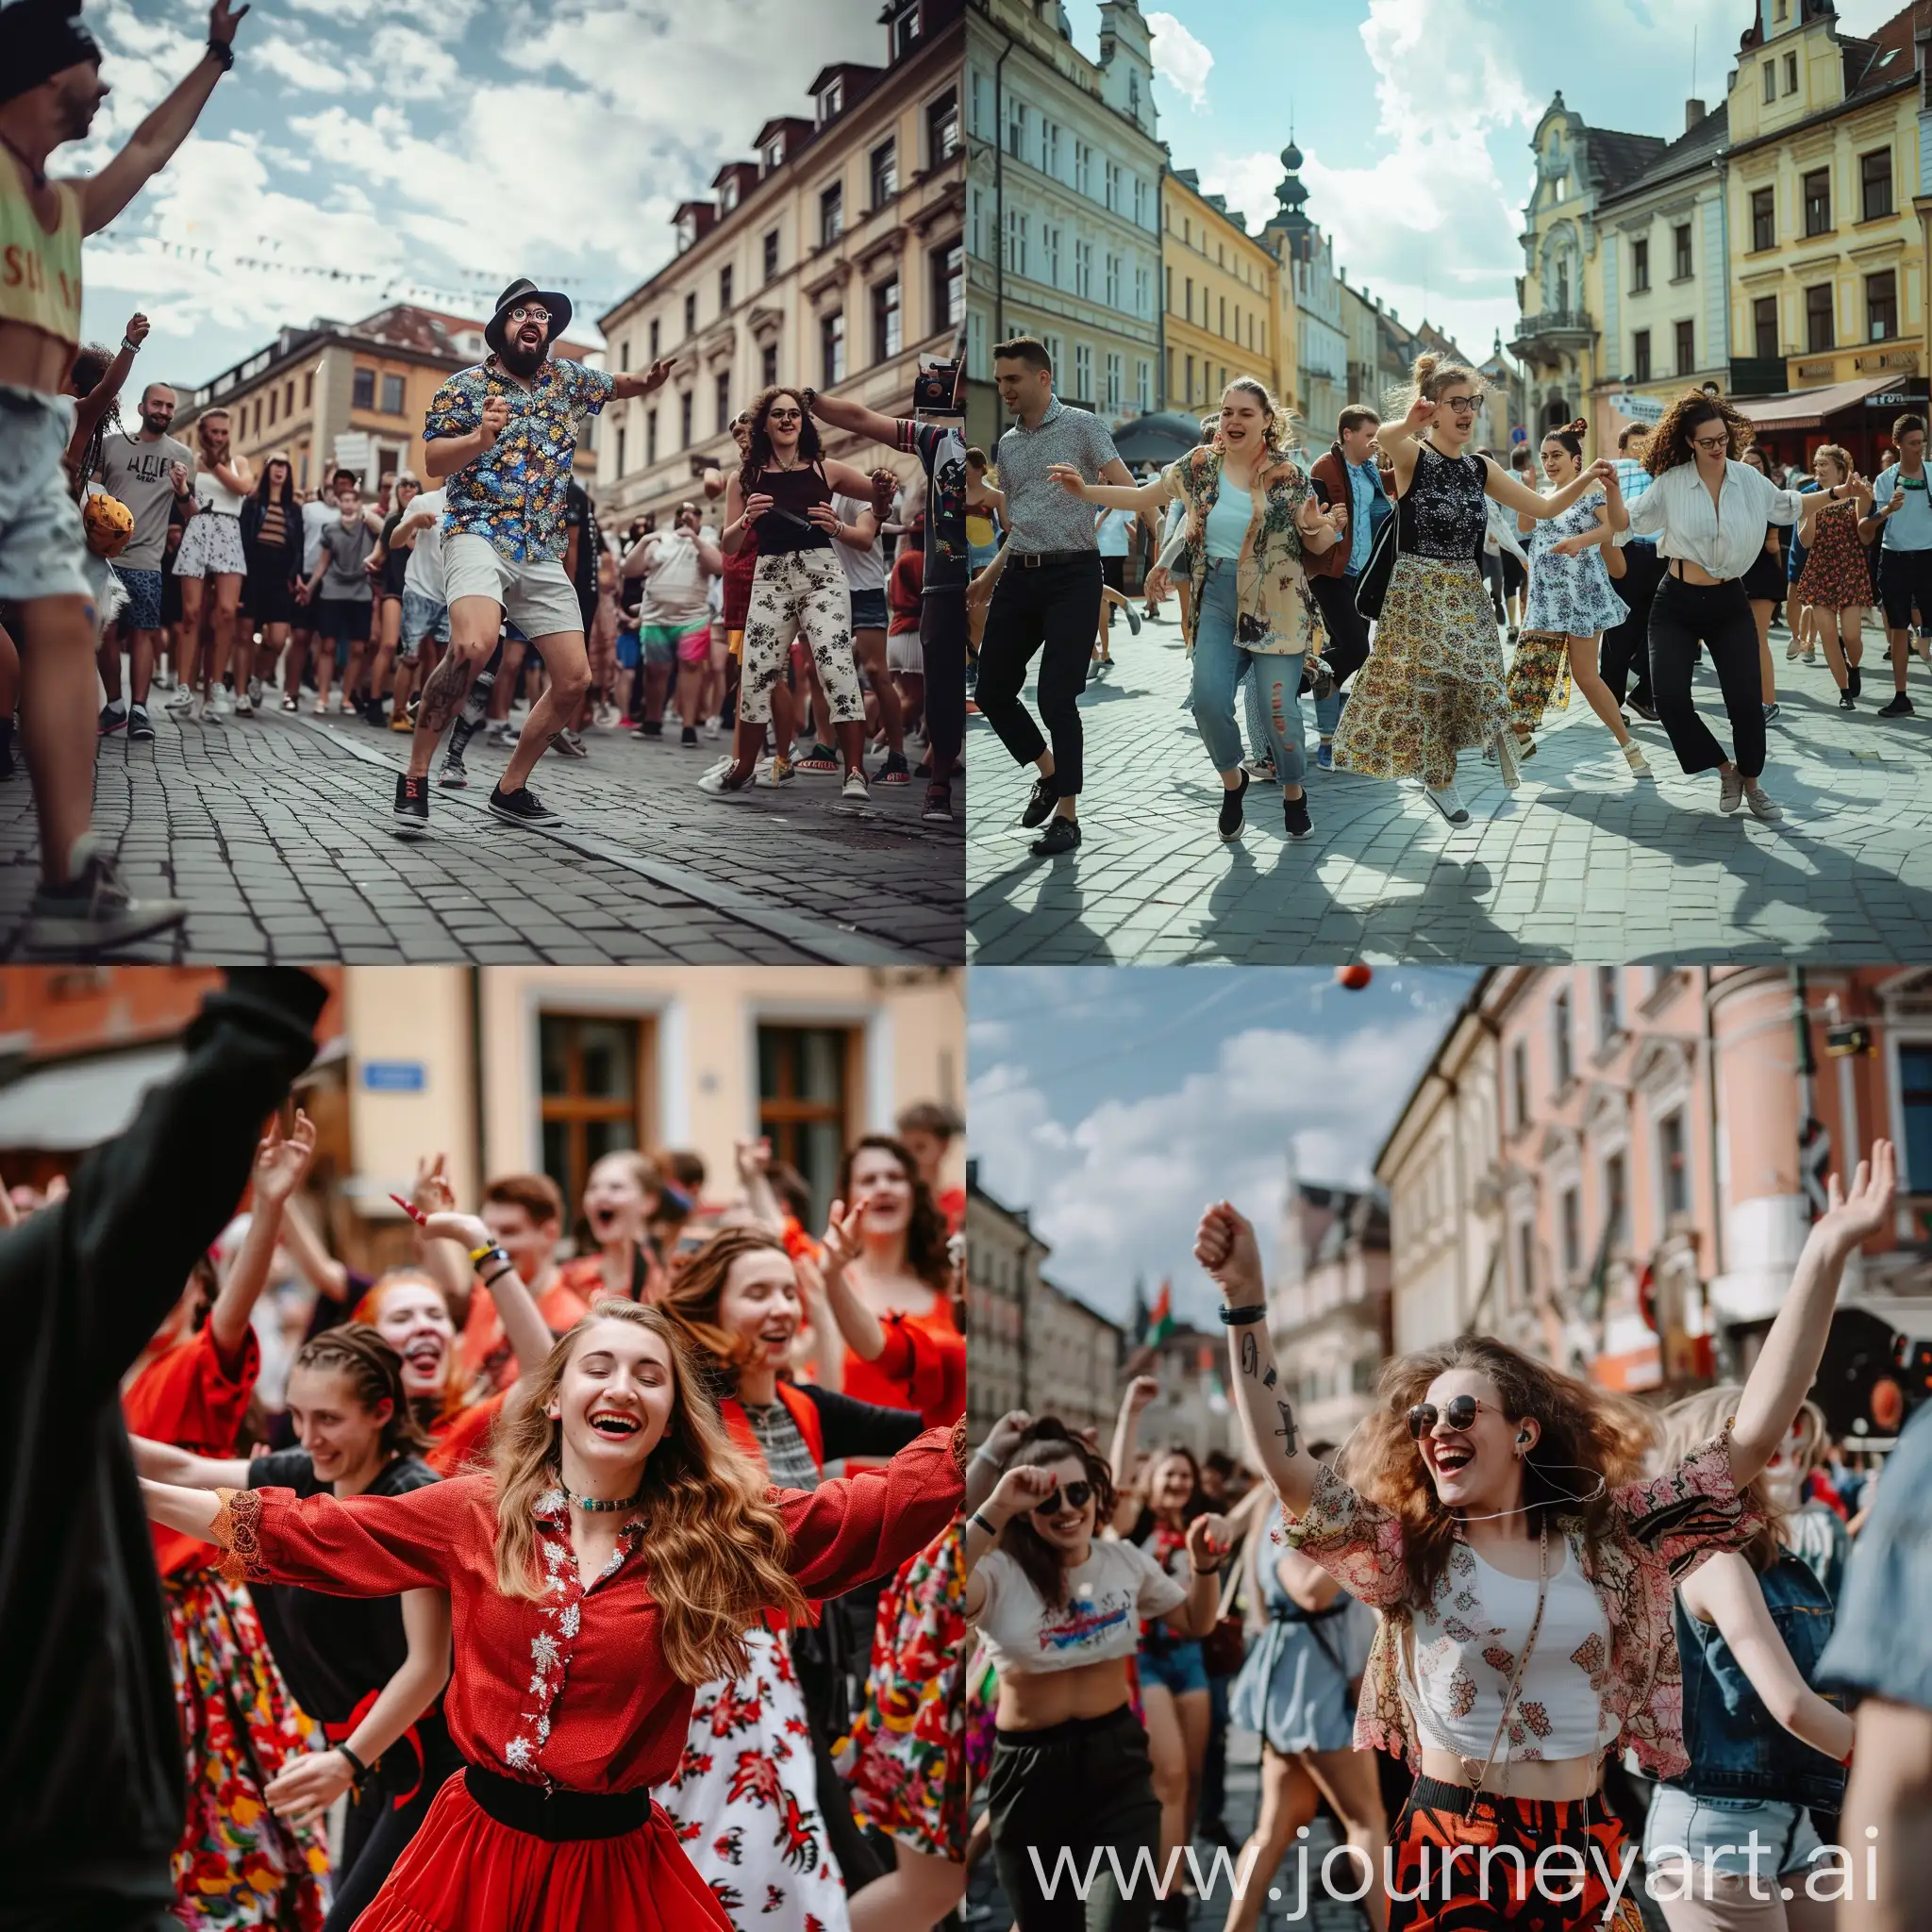 Bunch of local people dancing on the streets of Łódź